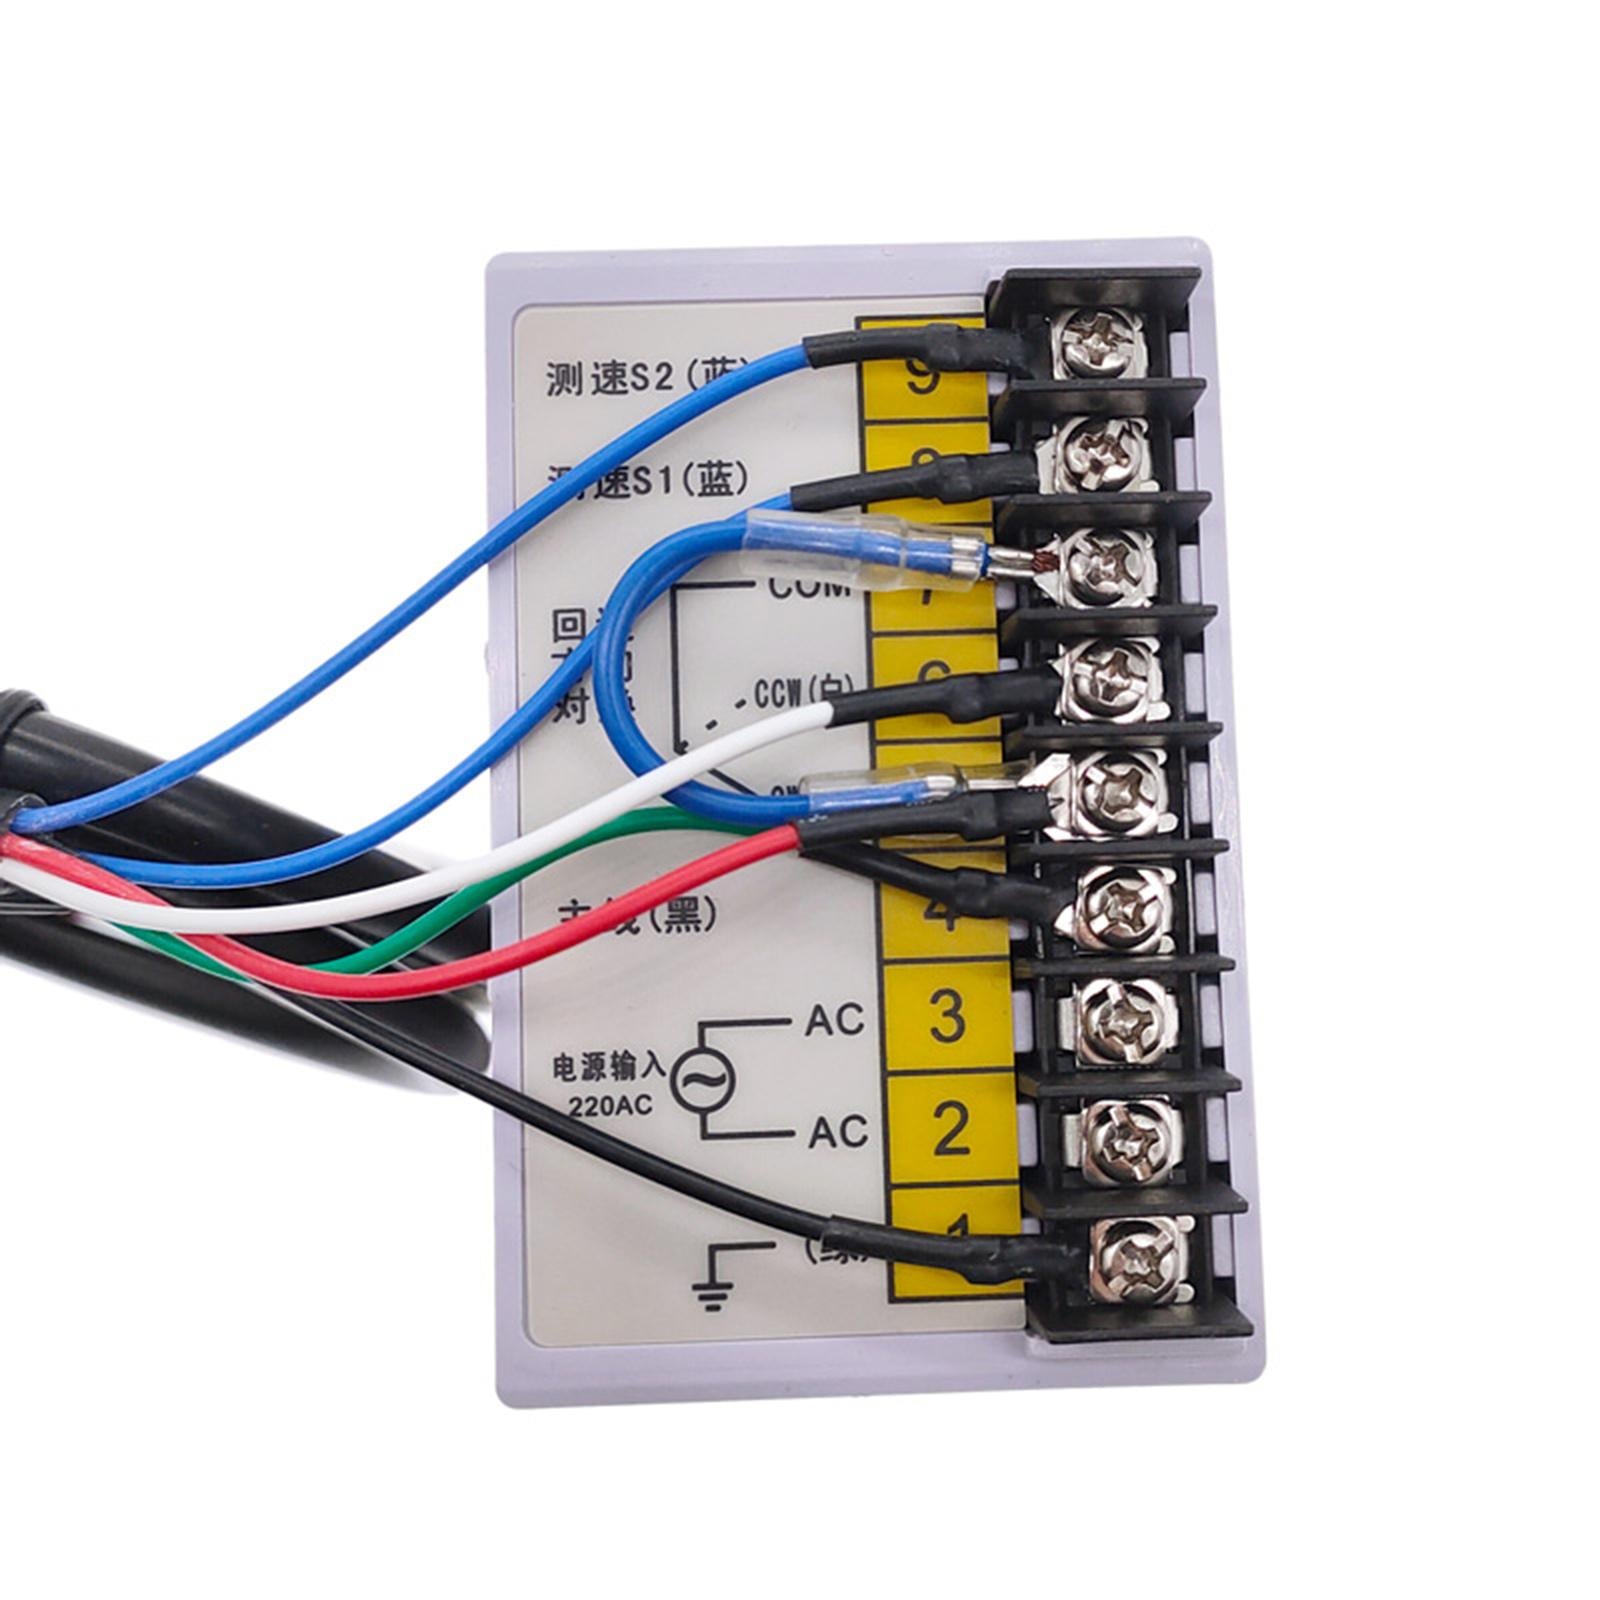 AC 220V UX-52A Display Motor Speed Pinpoint Controller for Router Greenhouse